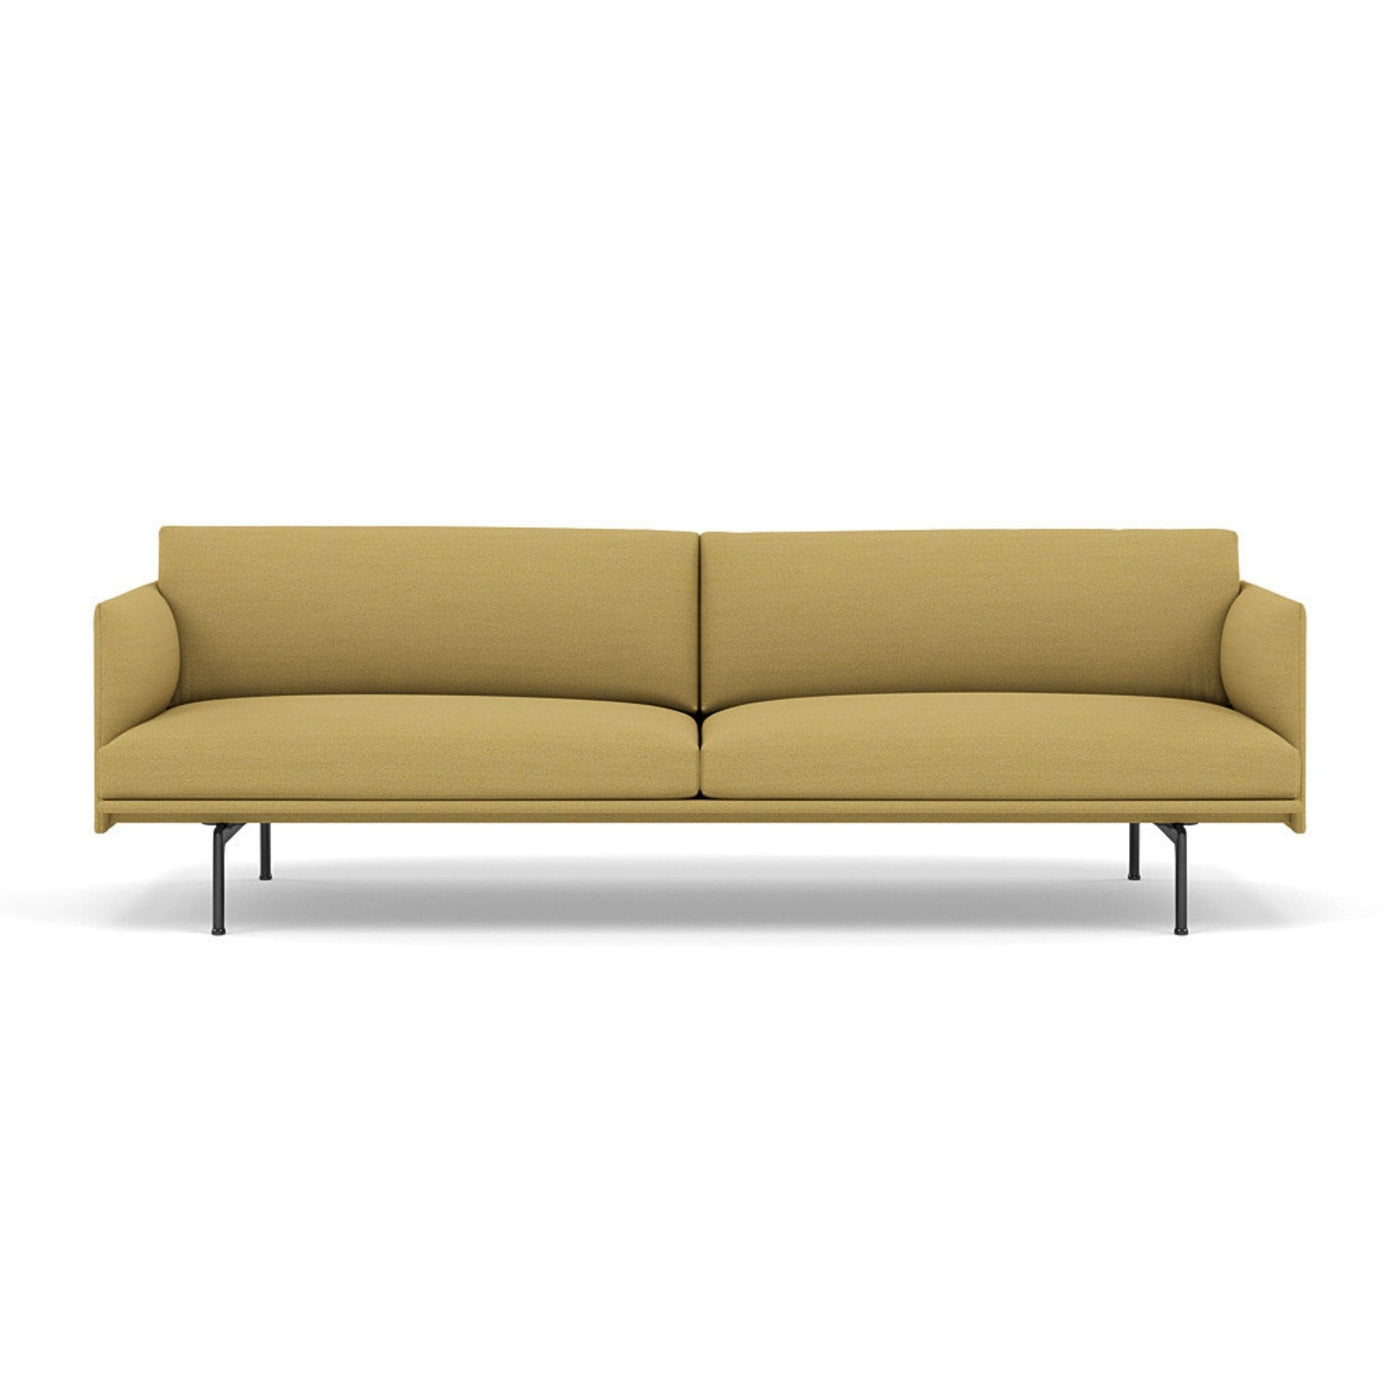 Muuto Outline  Studio Sofa 220 in hallingdal 407 and black legs. Made to order from someday designs. #colour_hallingdal-407